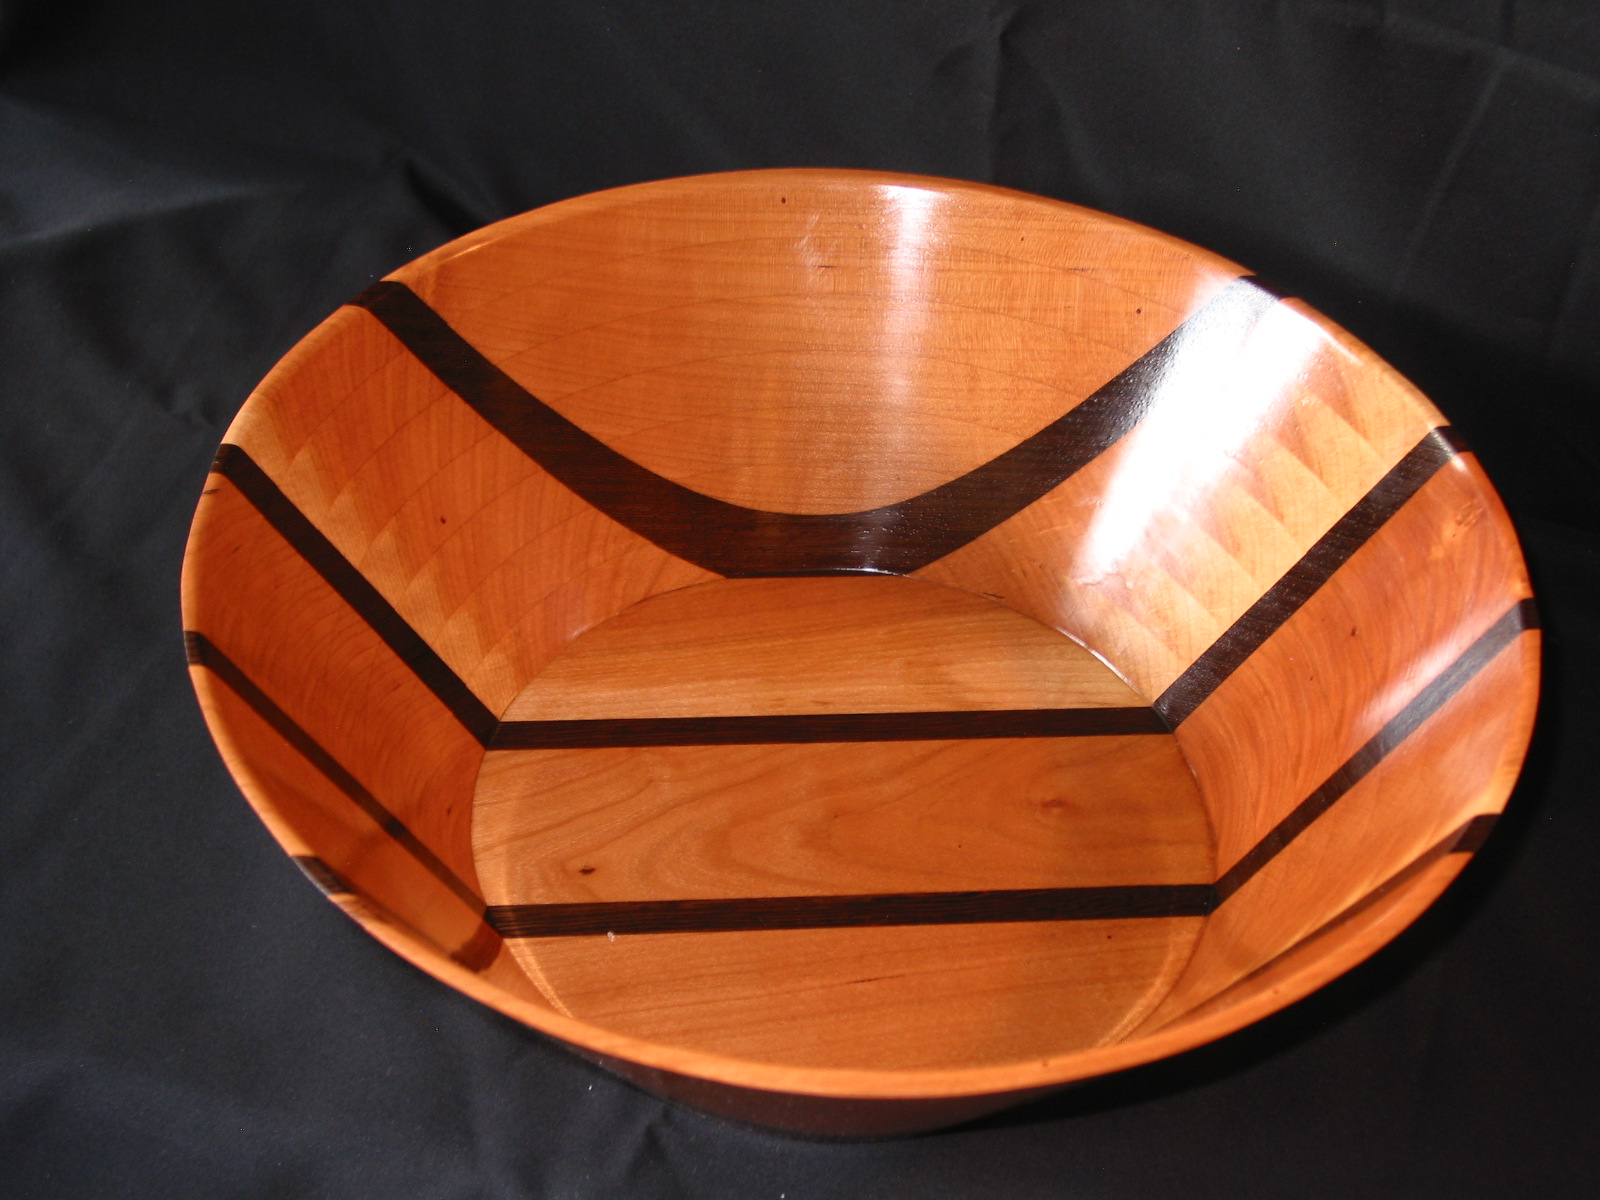 Cherry & Wenge Bowl made with a Scroll Saw- 14" diameter